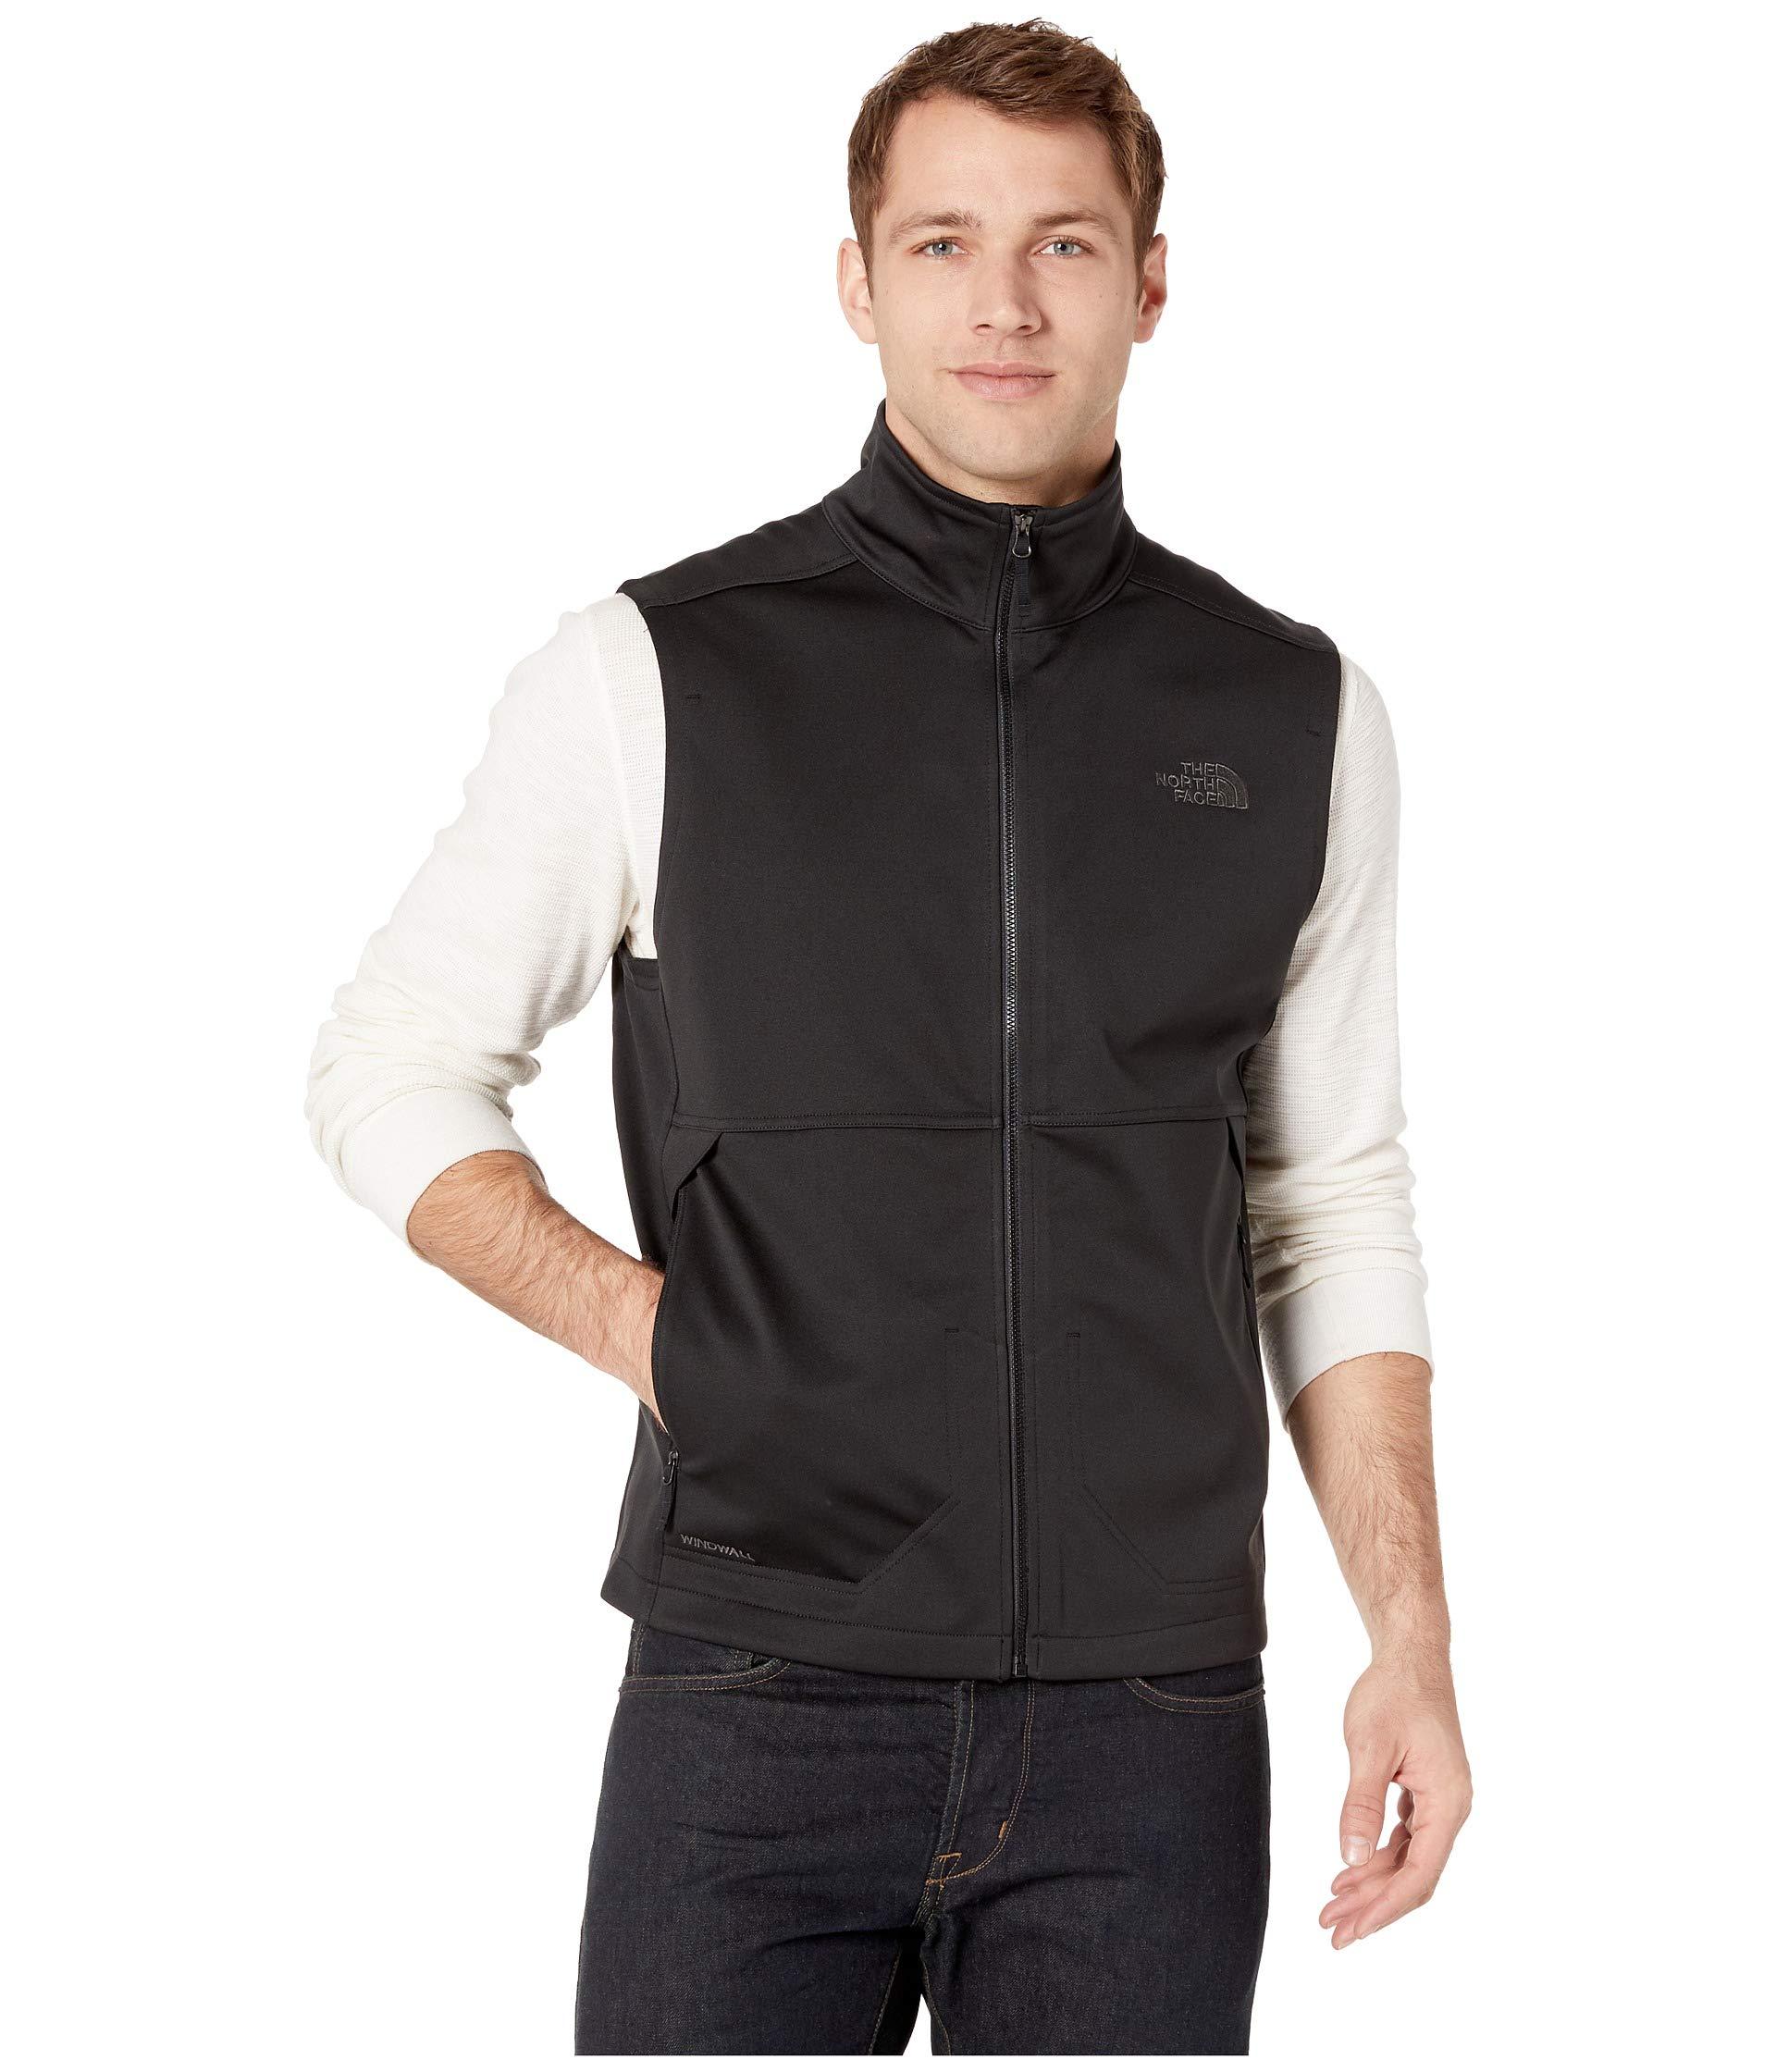 The North Face Fleece Apex Canyonwall Vest in Black for Men - Lyst